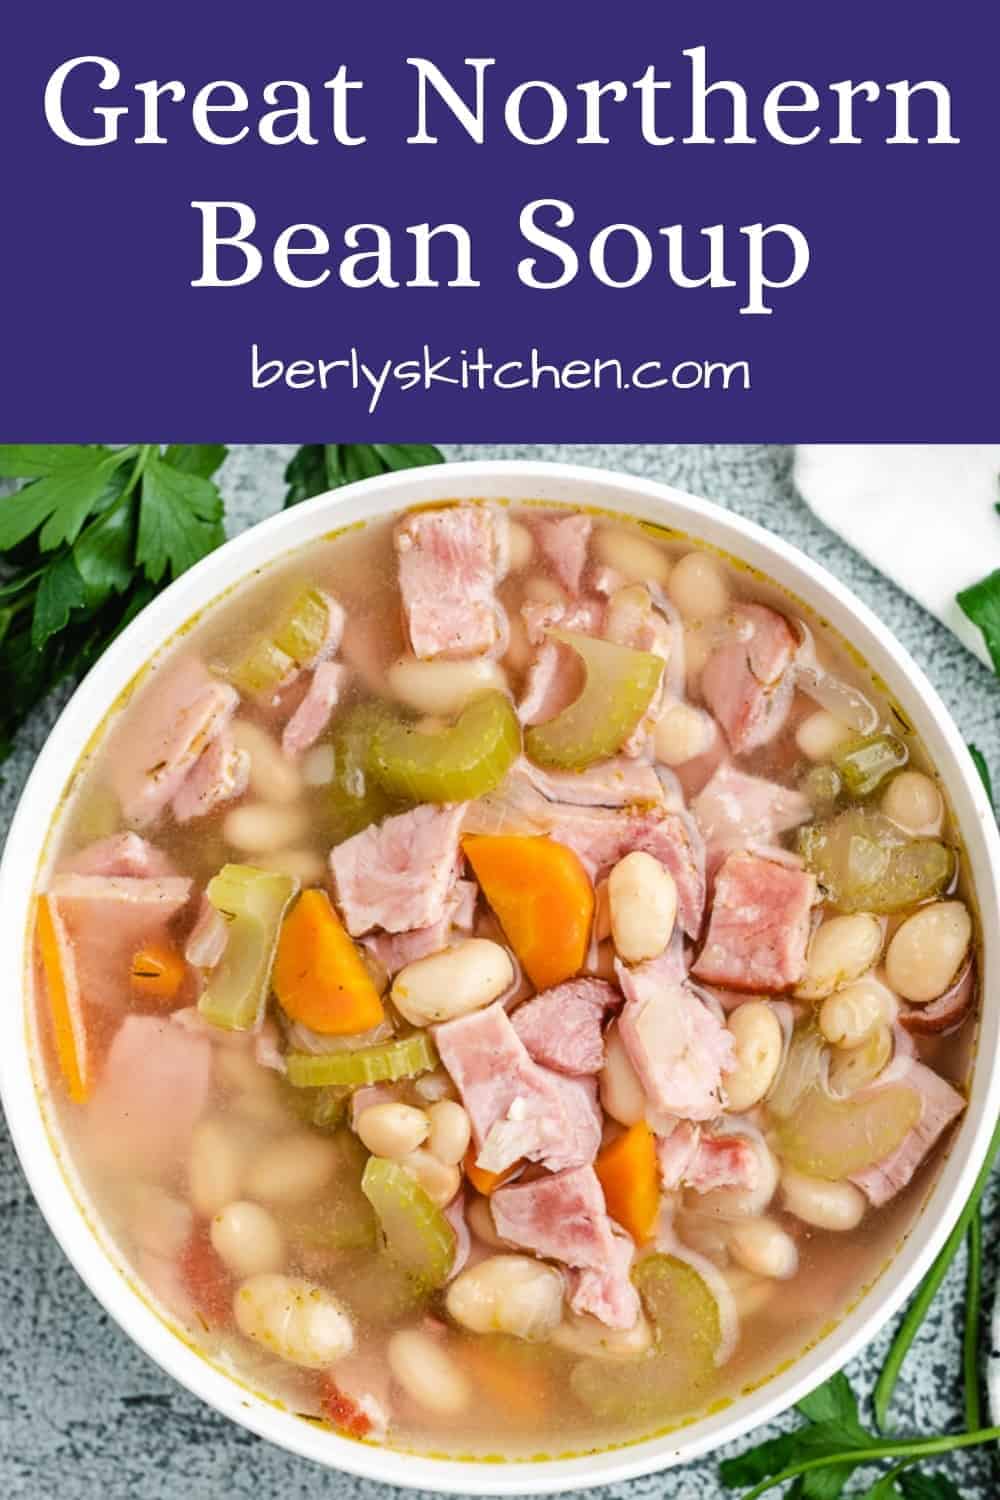 Great Northern Bean Soup